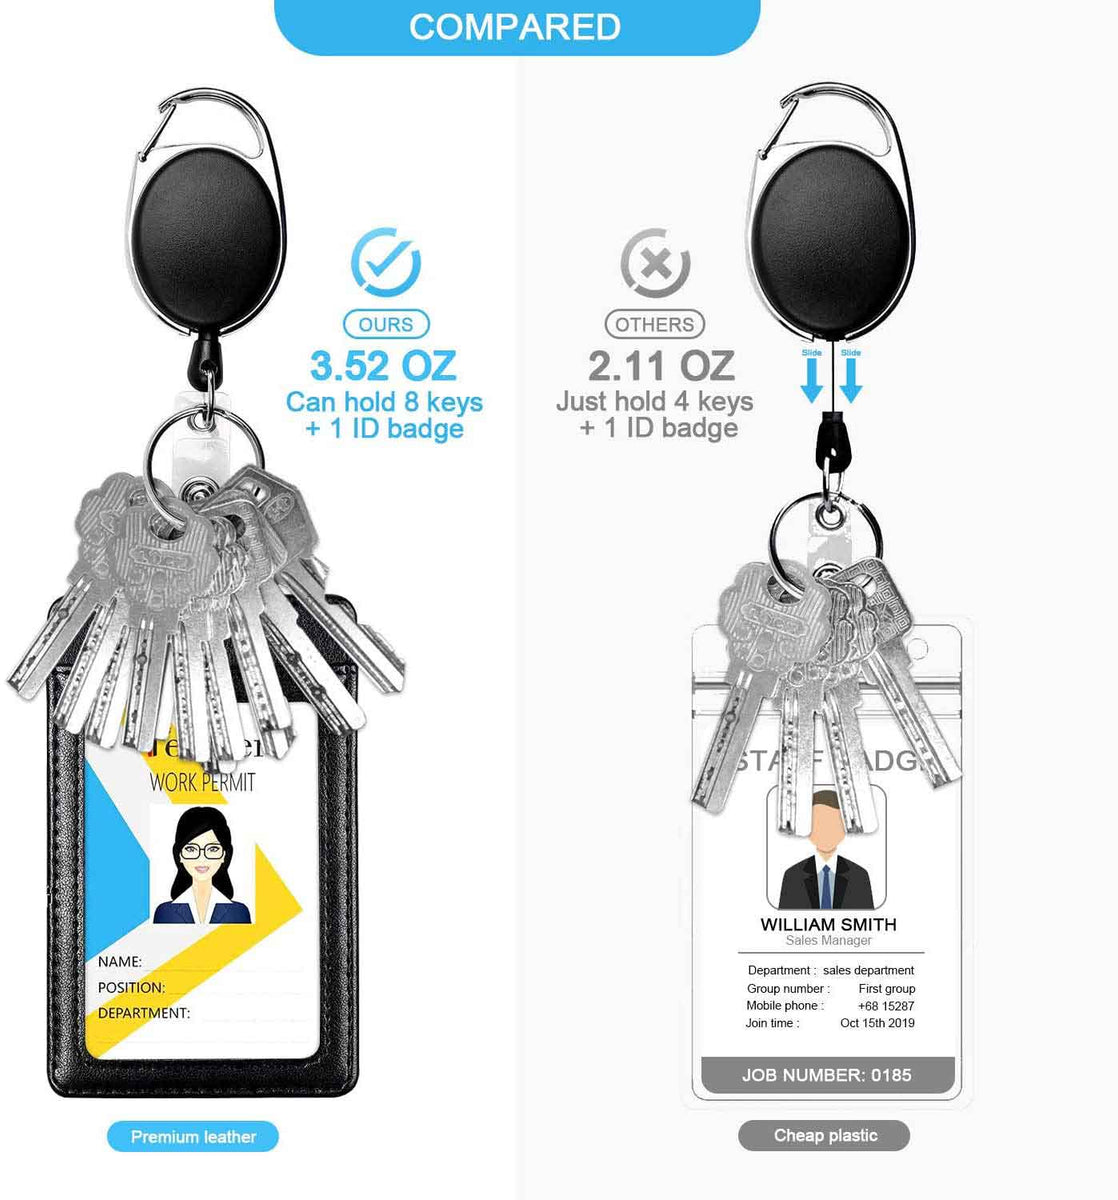 2 Pack Heavy Duty Retractable Badge Holder Reel, Will Well Metal ID Badge Holder with Belt Clip Key Ring for Name Card Keychain [All Metal Casing